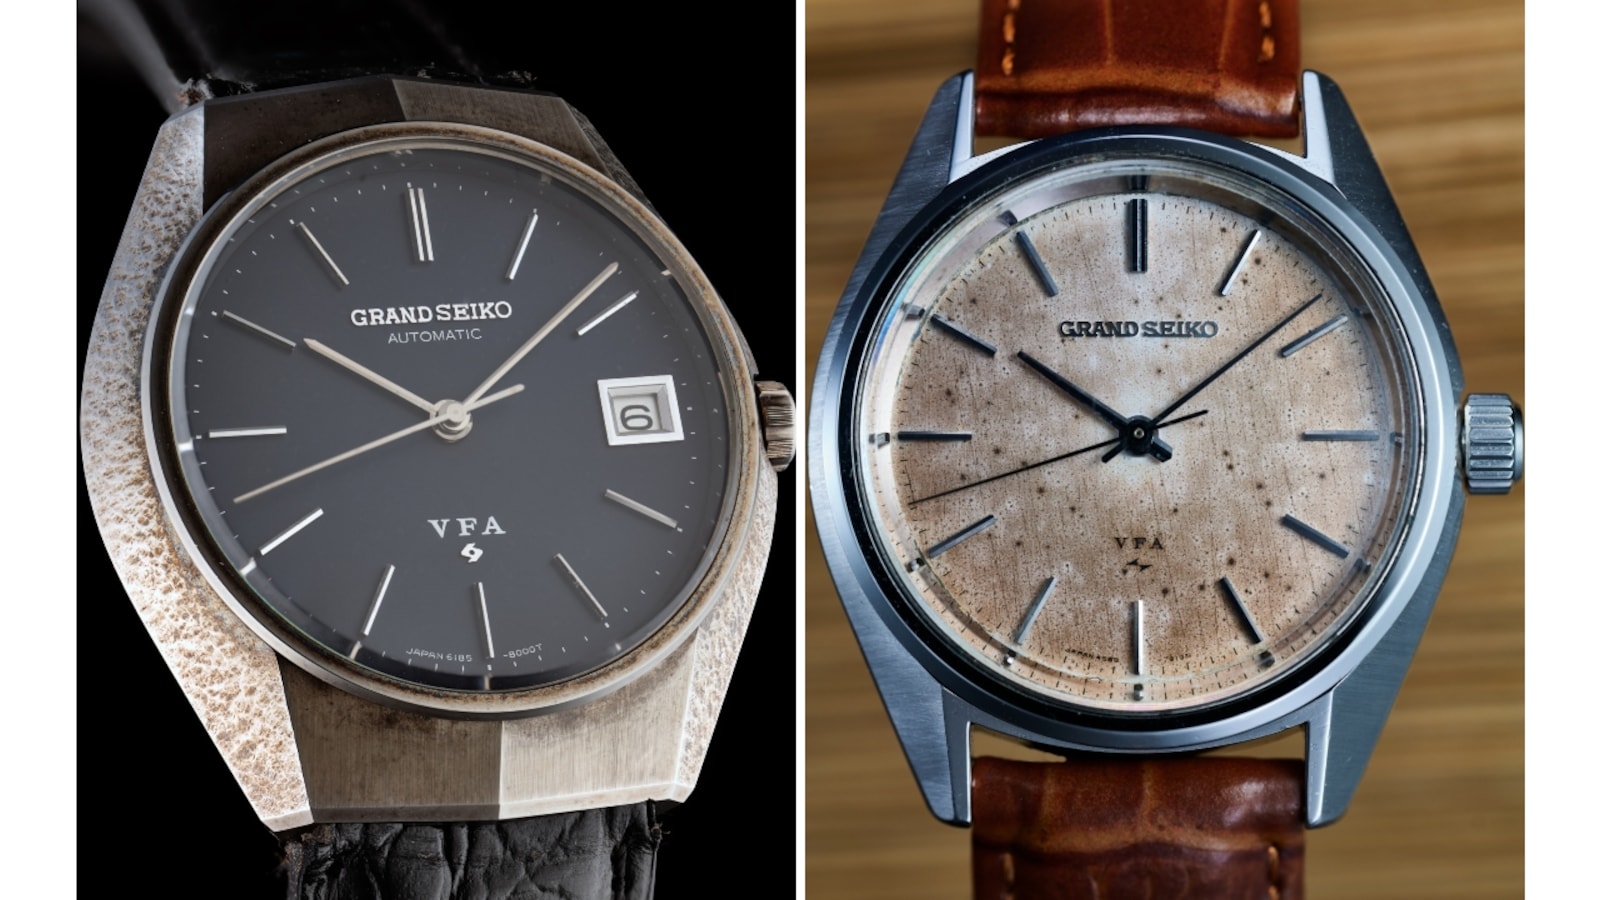 The Grand Seiko Guy takes time to collect and document these vintage luxury  watches